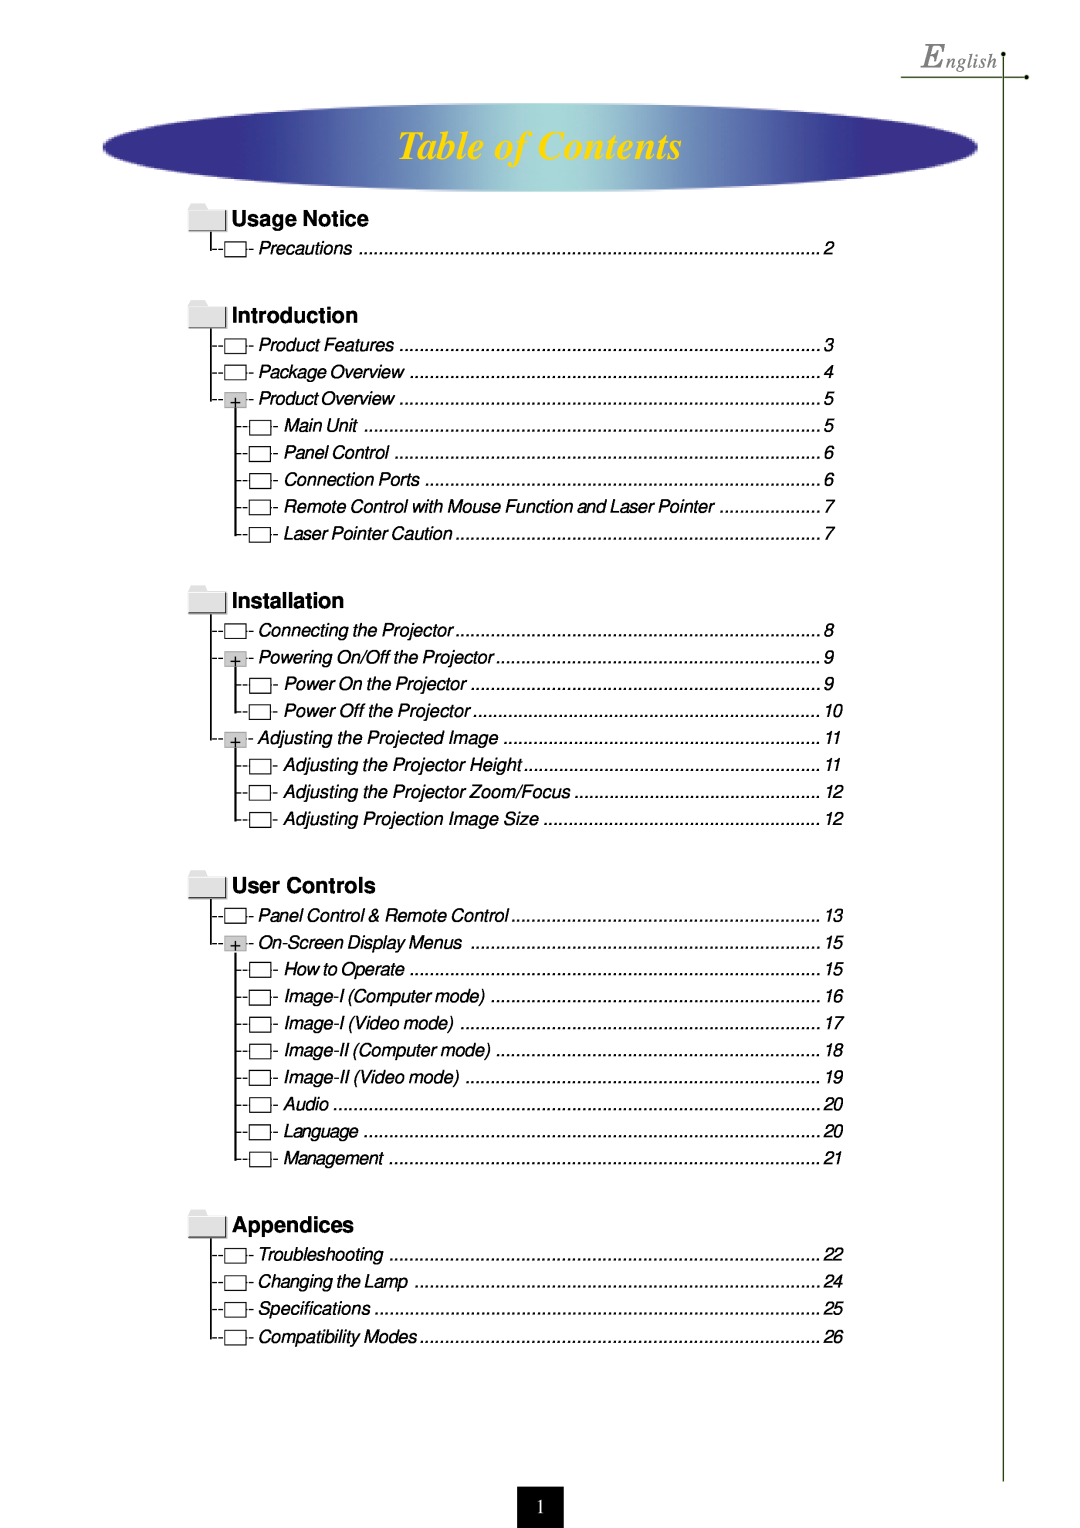 Optoma Technology EP750 specifications Table of Contents, English, Usage Notice, Introduction, Installation, User Controls 